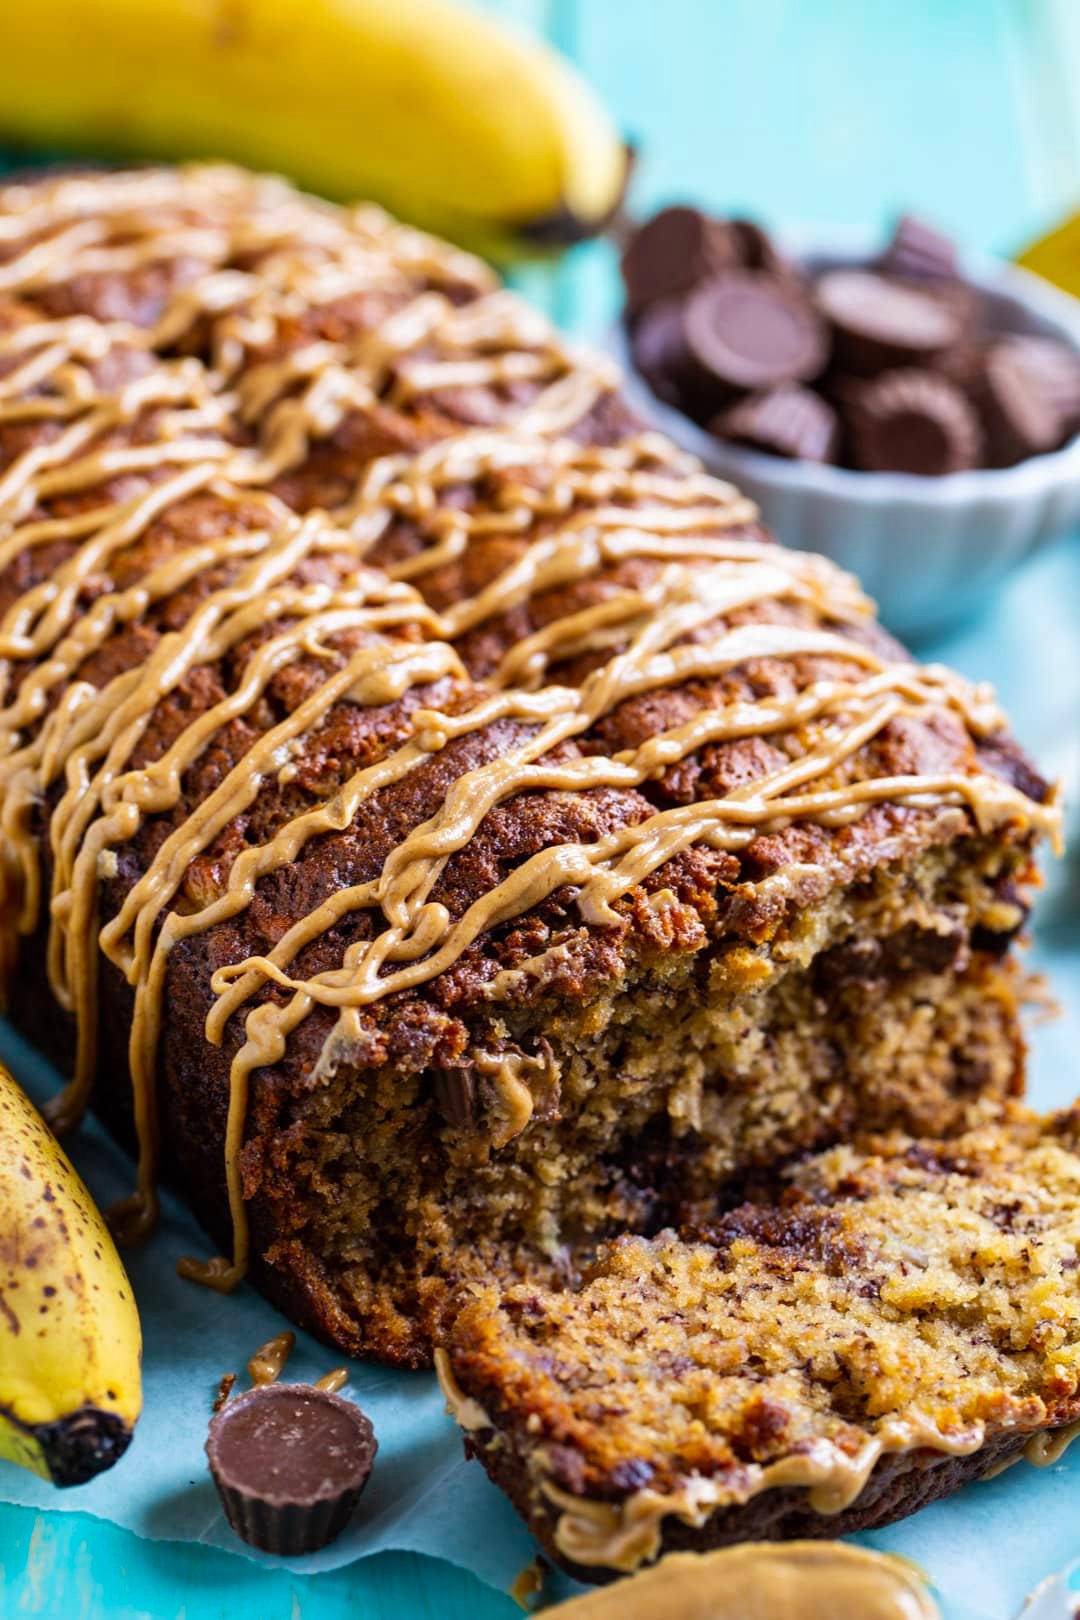 Peanut Butter Cup Banana Bread with slice cut.